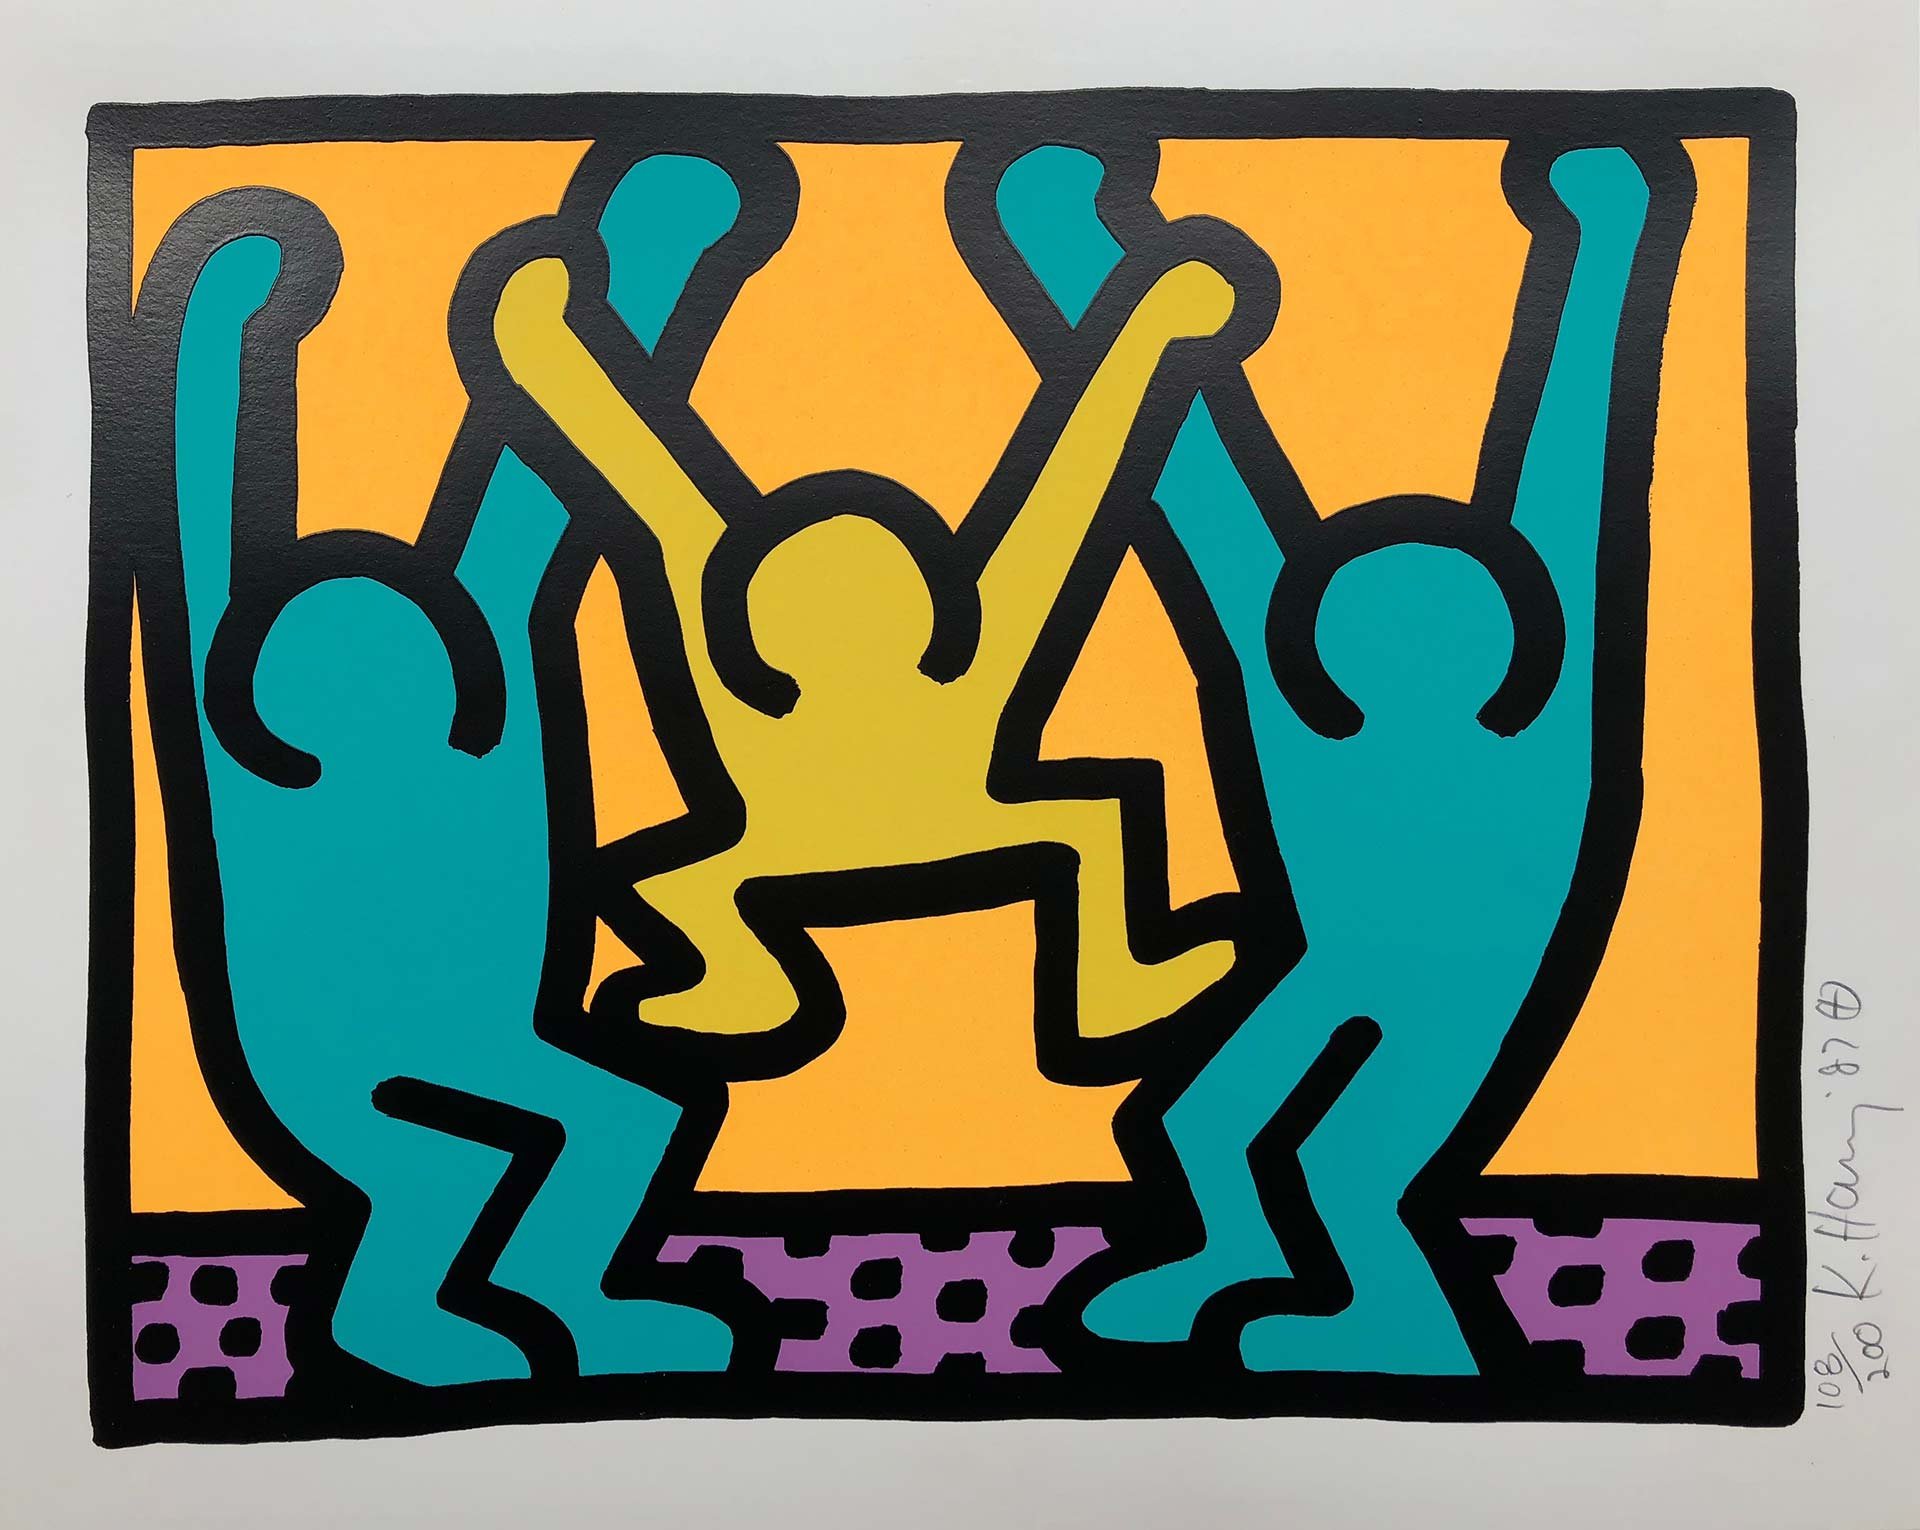 Keith Haring – «Pop Shop I» 1987, Silkscreen on paper, 30,5 x 38 cm, Ed. of 200, signed 